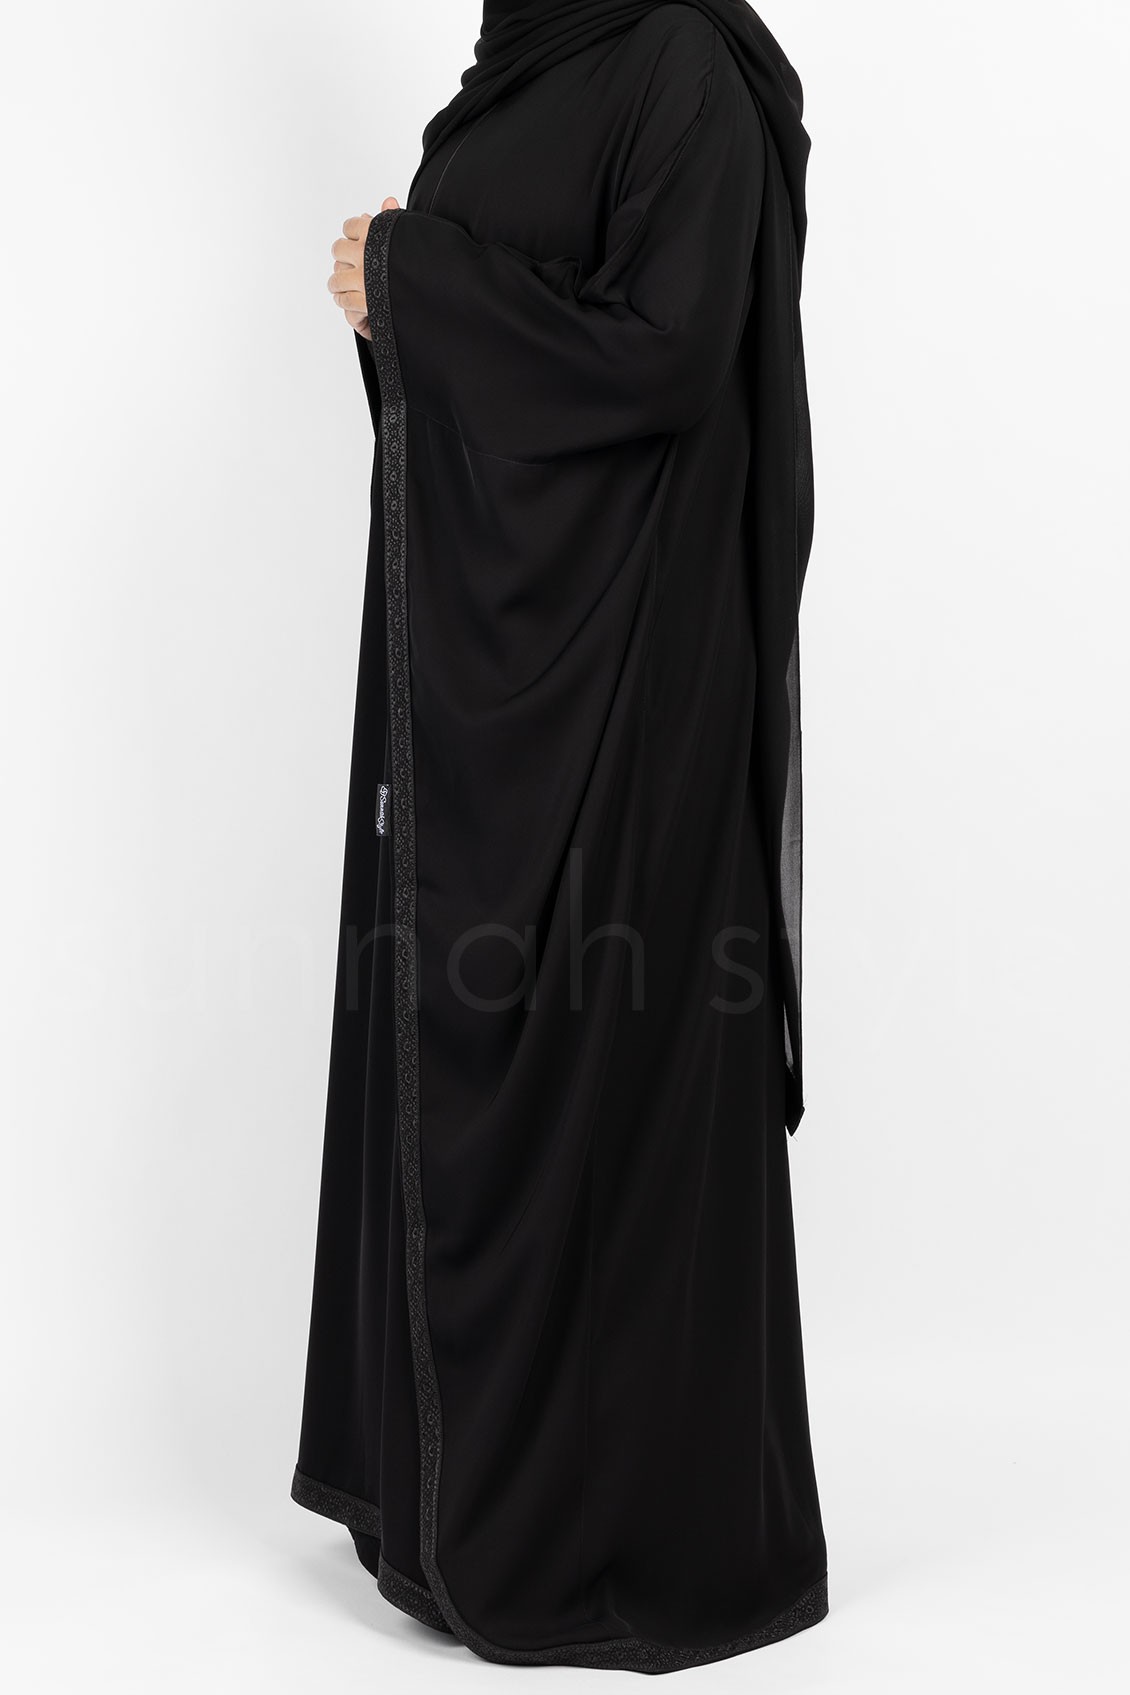 Sunnah Style Obsidian Butterfly Abaya Black Batwing Embroidery